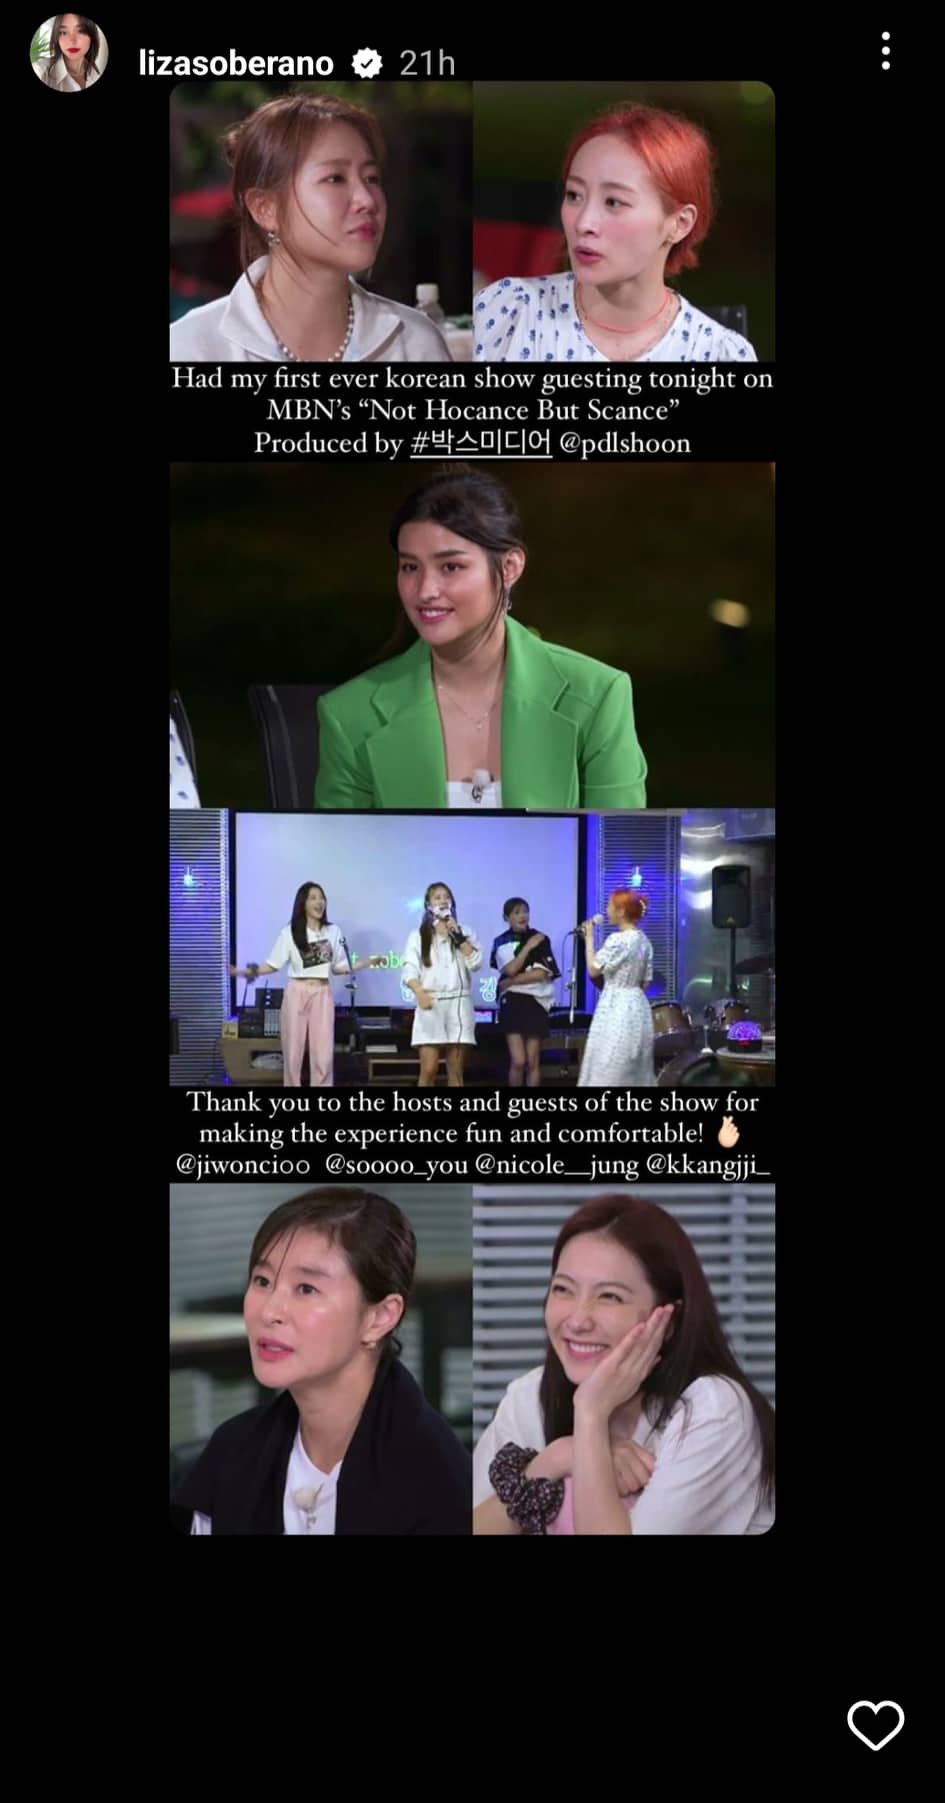 Liza Soberano guests on South Korean TV show Not Hocance But Scance